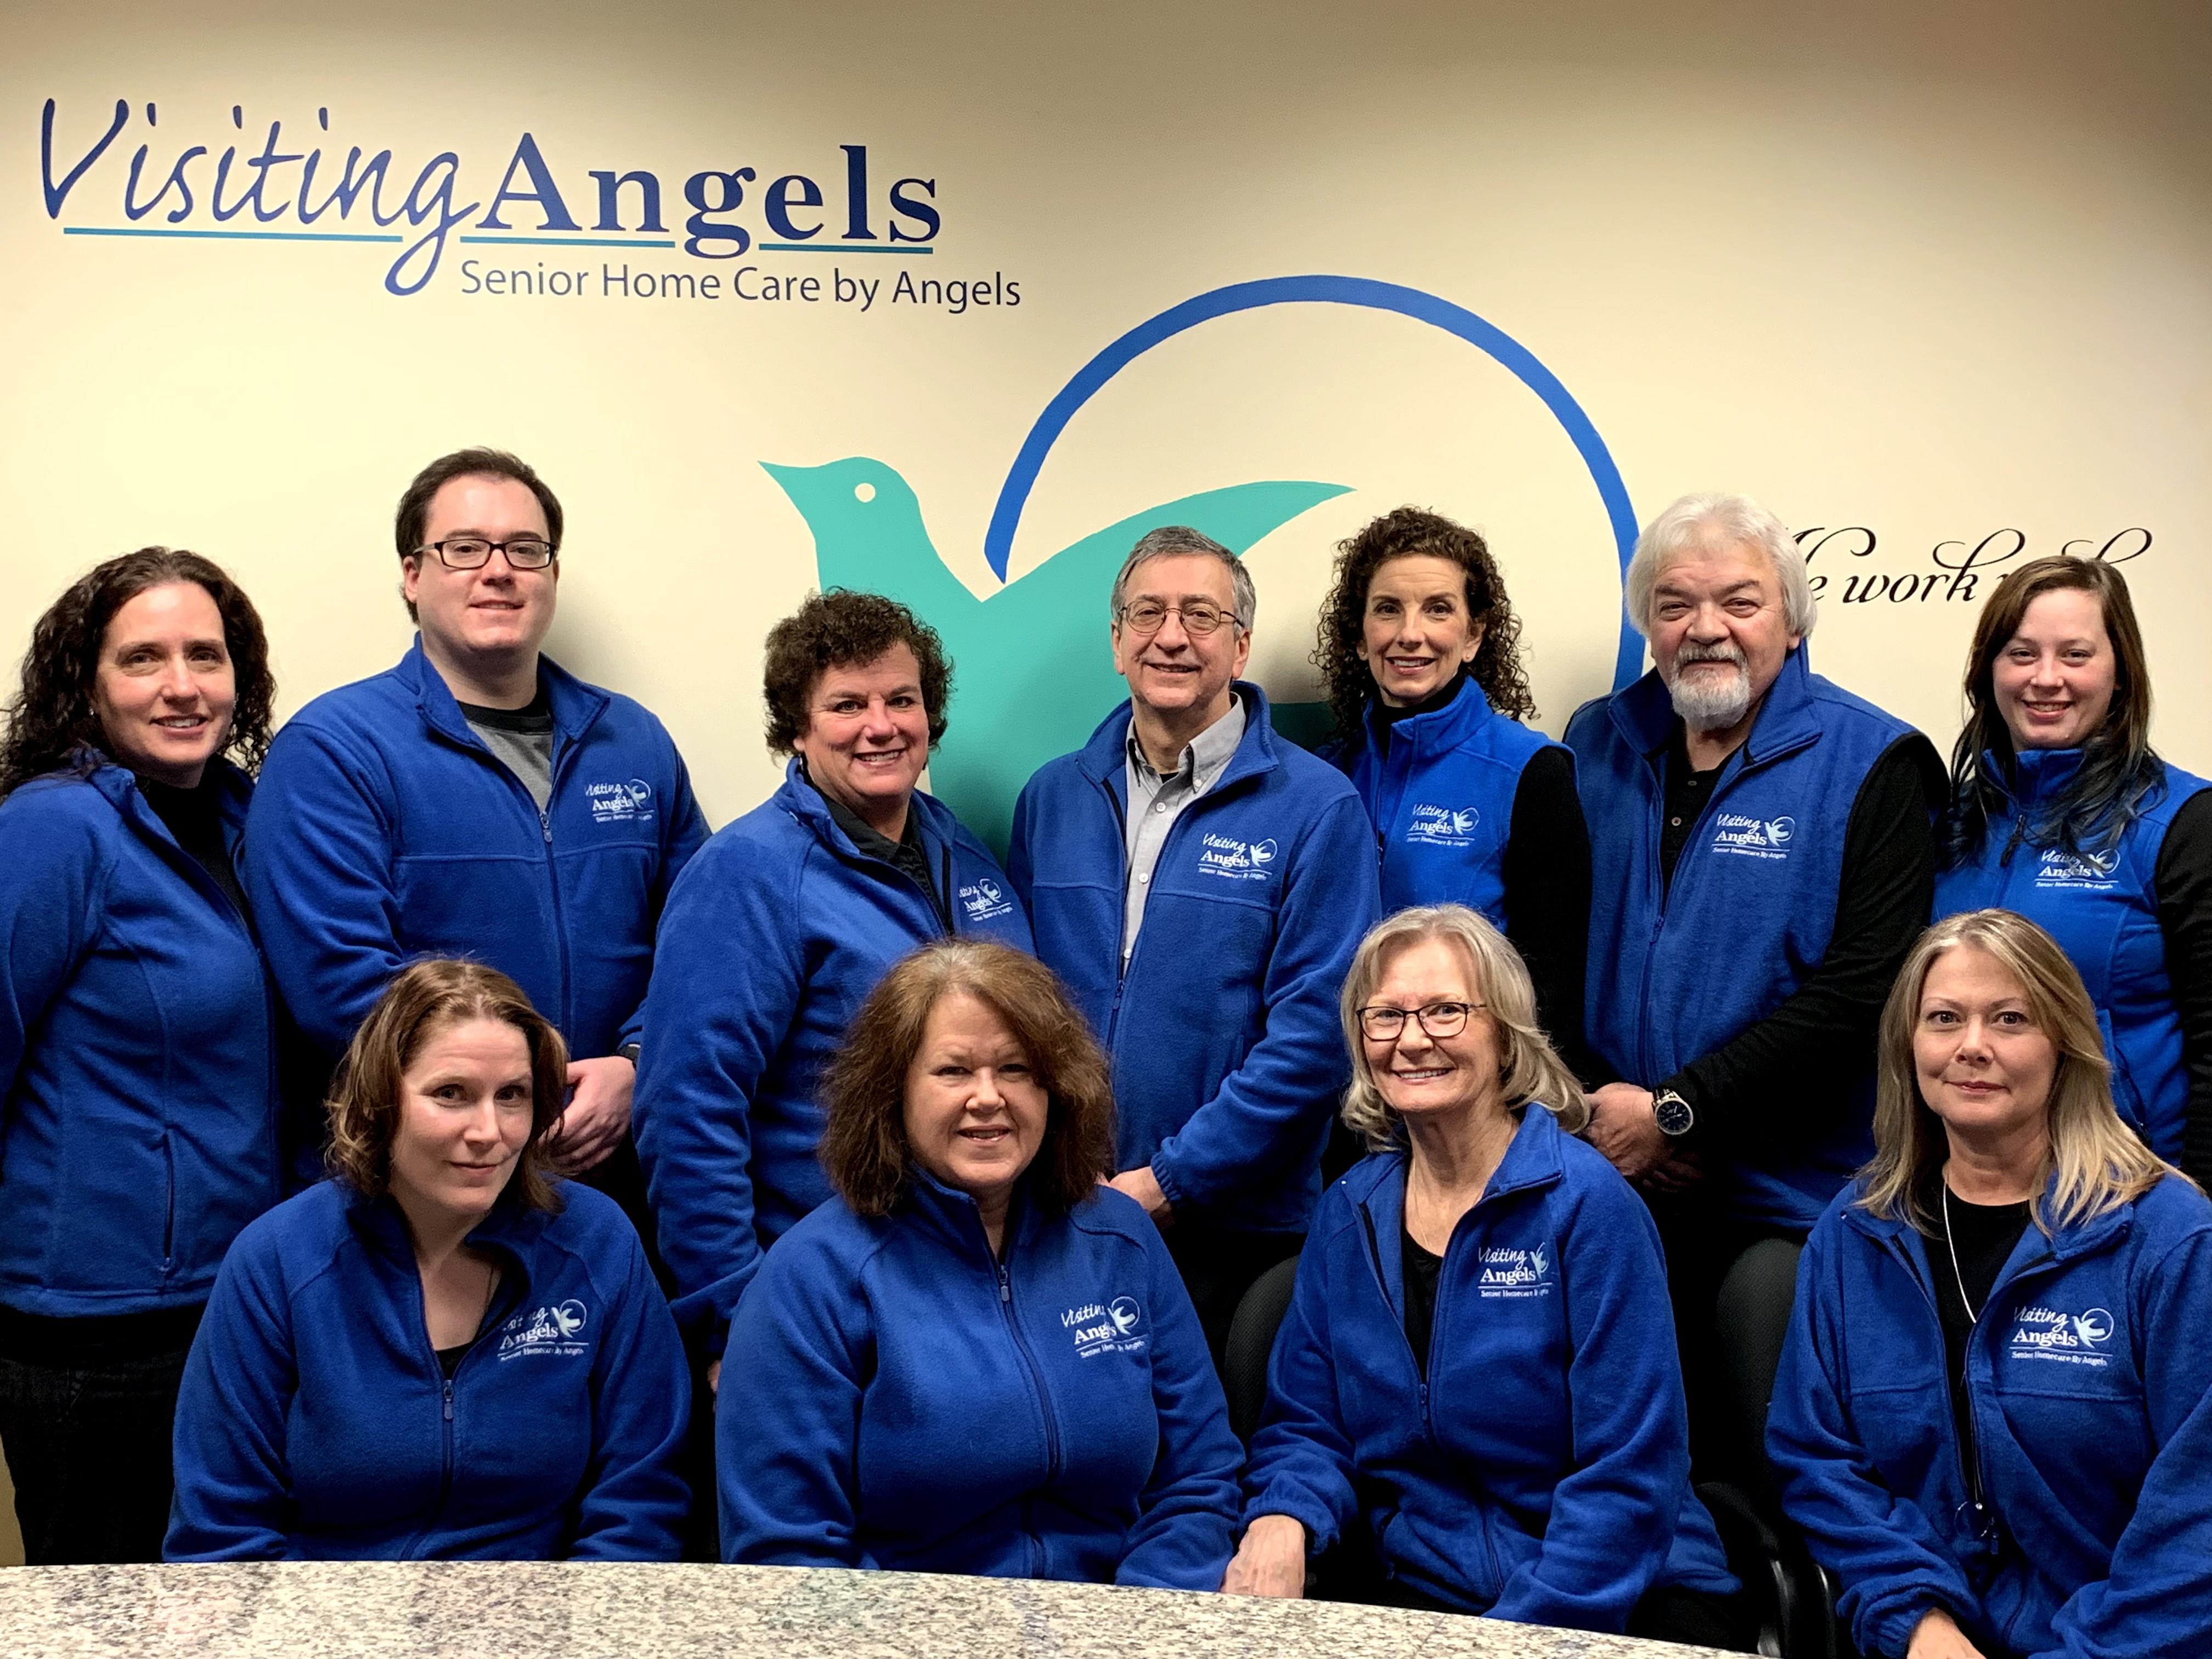 Visiting Angels Rochester team photo